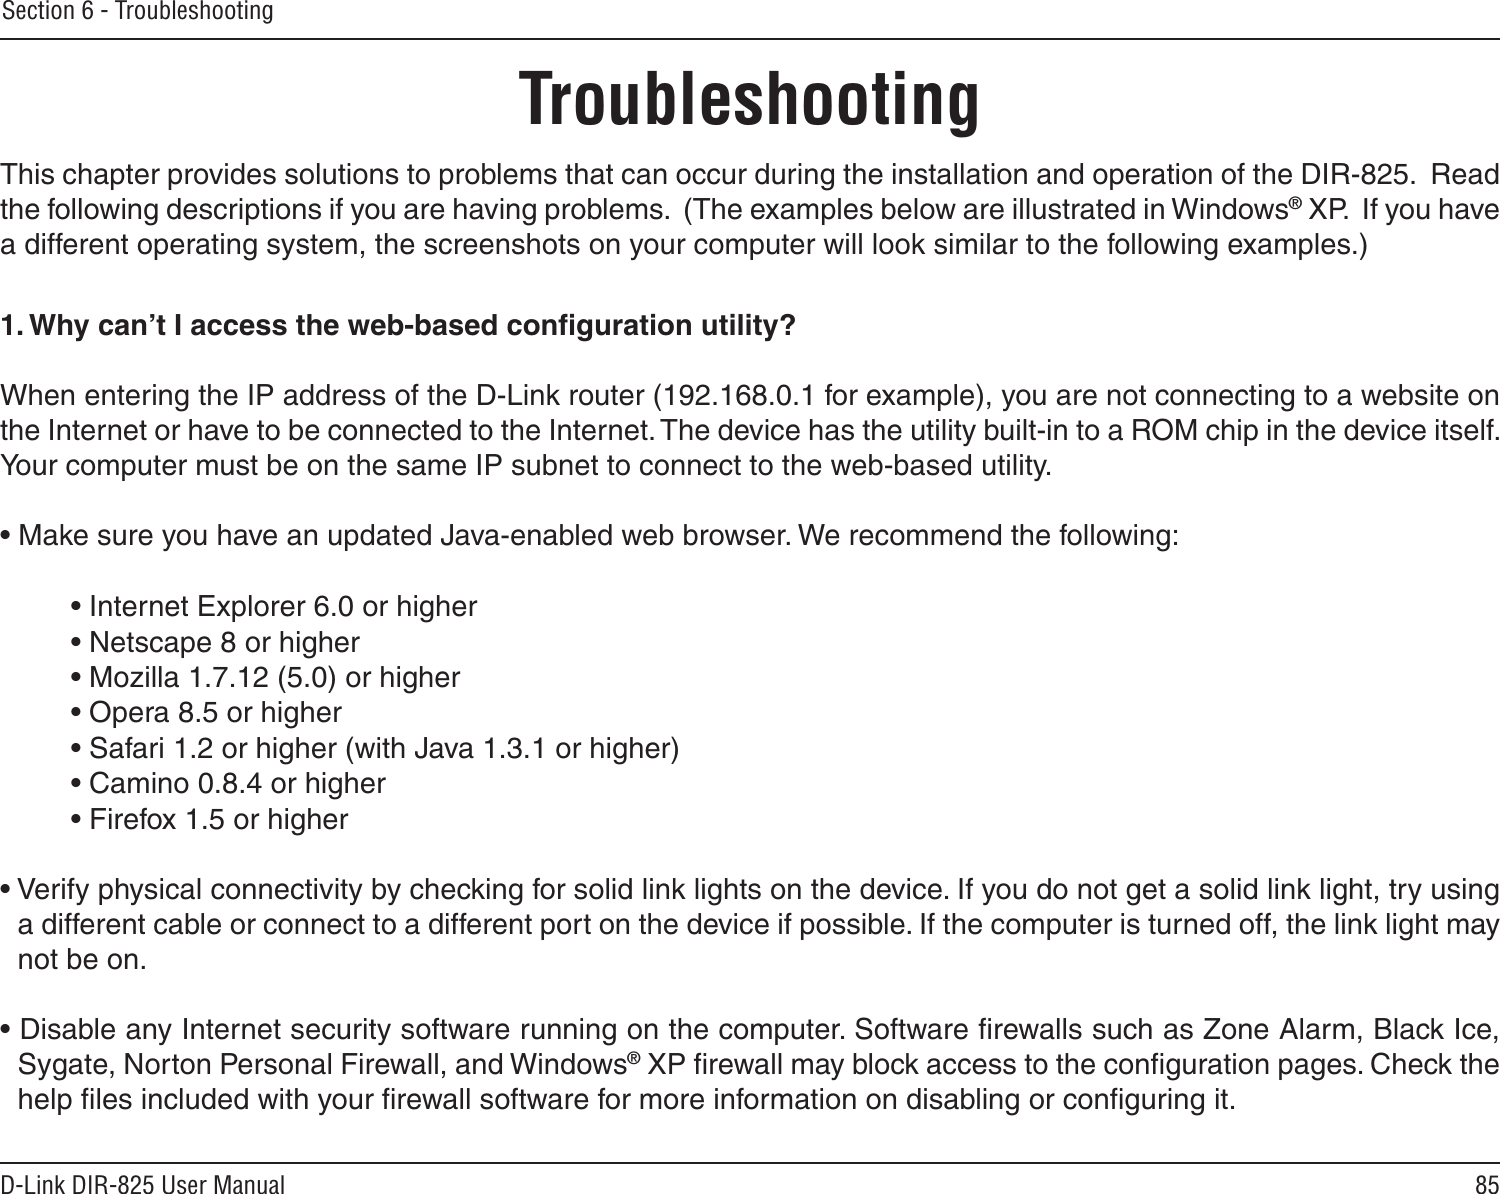 85D-Link DIR-825 User ManualSection 6 - TroubleshootingTroubleshootingThis chapter provides solutions to problems that can occur during the installation and operation of the DIR-825.  Read the following descriptions if you are having problems.  (The examples below are illustrated in Windows® XP.  If you have a different operating system, the screenshots on your computer will look similar to the following examples.)1. Why can’t I access the web-based conﬁguration utility?When entering the IP address of the D-Link router (192.168.0.1 for example), you are not connecting to a website on the Internet or have to be connected to the Internet. The device has the utility built-in to a ROM chip in the device itself. Your computer must be on the same IP subnet to connect to the web-based utility. • Make sure you have an updated Java-enabled web browser. We recommend the following: • Internet Explorer 6.0 or higher • Netscape 8 or higher • Mozilla 1.7.12 (5.0) or higher • Opera 8.5 or higher • Safari 1.2 or higher (with Java 1.3.1 or higher) • Camino 0.8.4 or higher • Firefox 1.5 or higher • Verify physical connectivity by checking for solid link lights on the device. If you do not get a solid link light, try using a different cable or connect to a different port on the device if possible. If the computer is turned off, the link light may not be on.• Disable any Internet security software running on the computer. Software ﬁrewalls such as Zone Alarm, Black Ice, Sygate, Norton Personal Firewall, and Windows® XP ﬁrewall may block access to the conﬁguration pages. Check the help ﬁles included with your ﬁrewall software for more information on disabling or conﬁguring it.